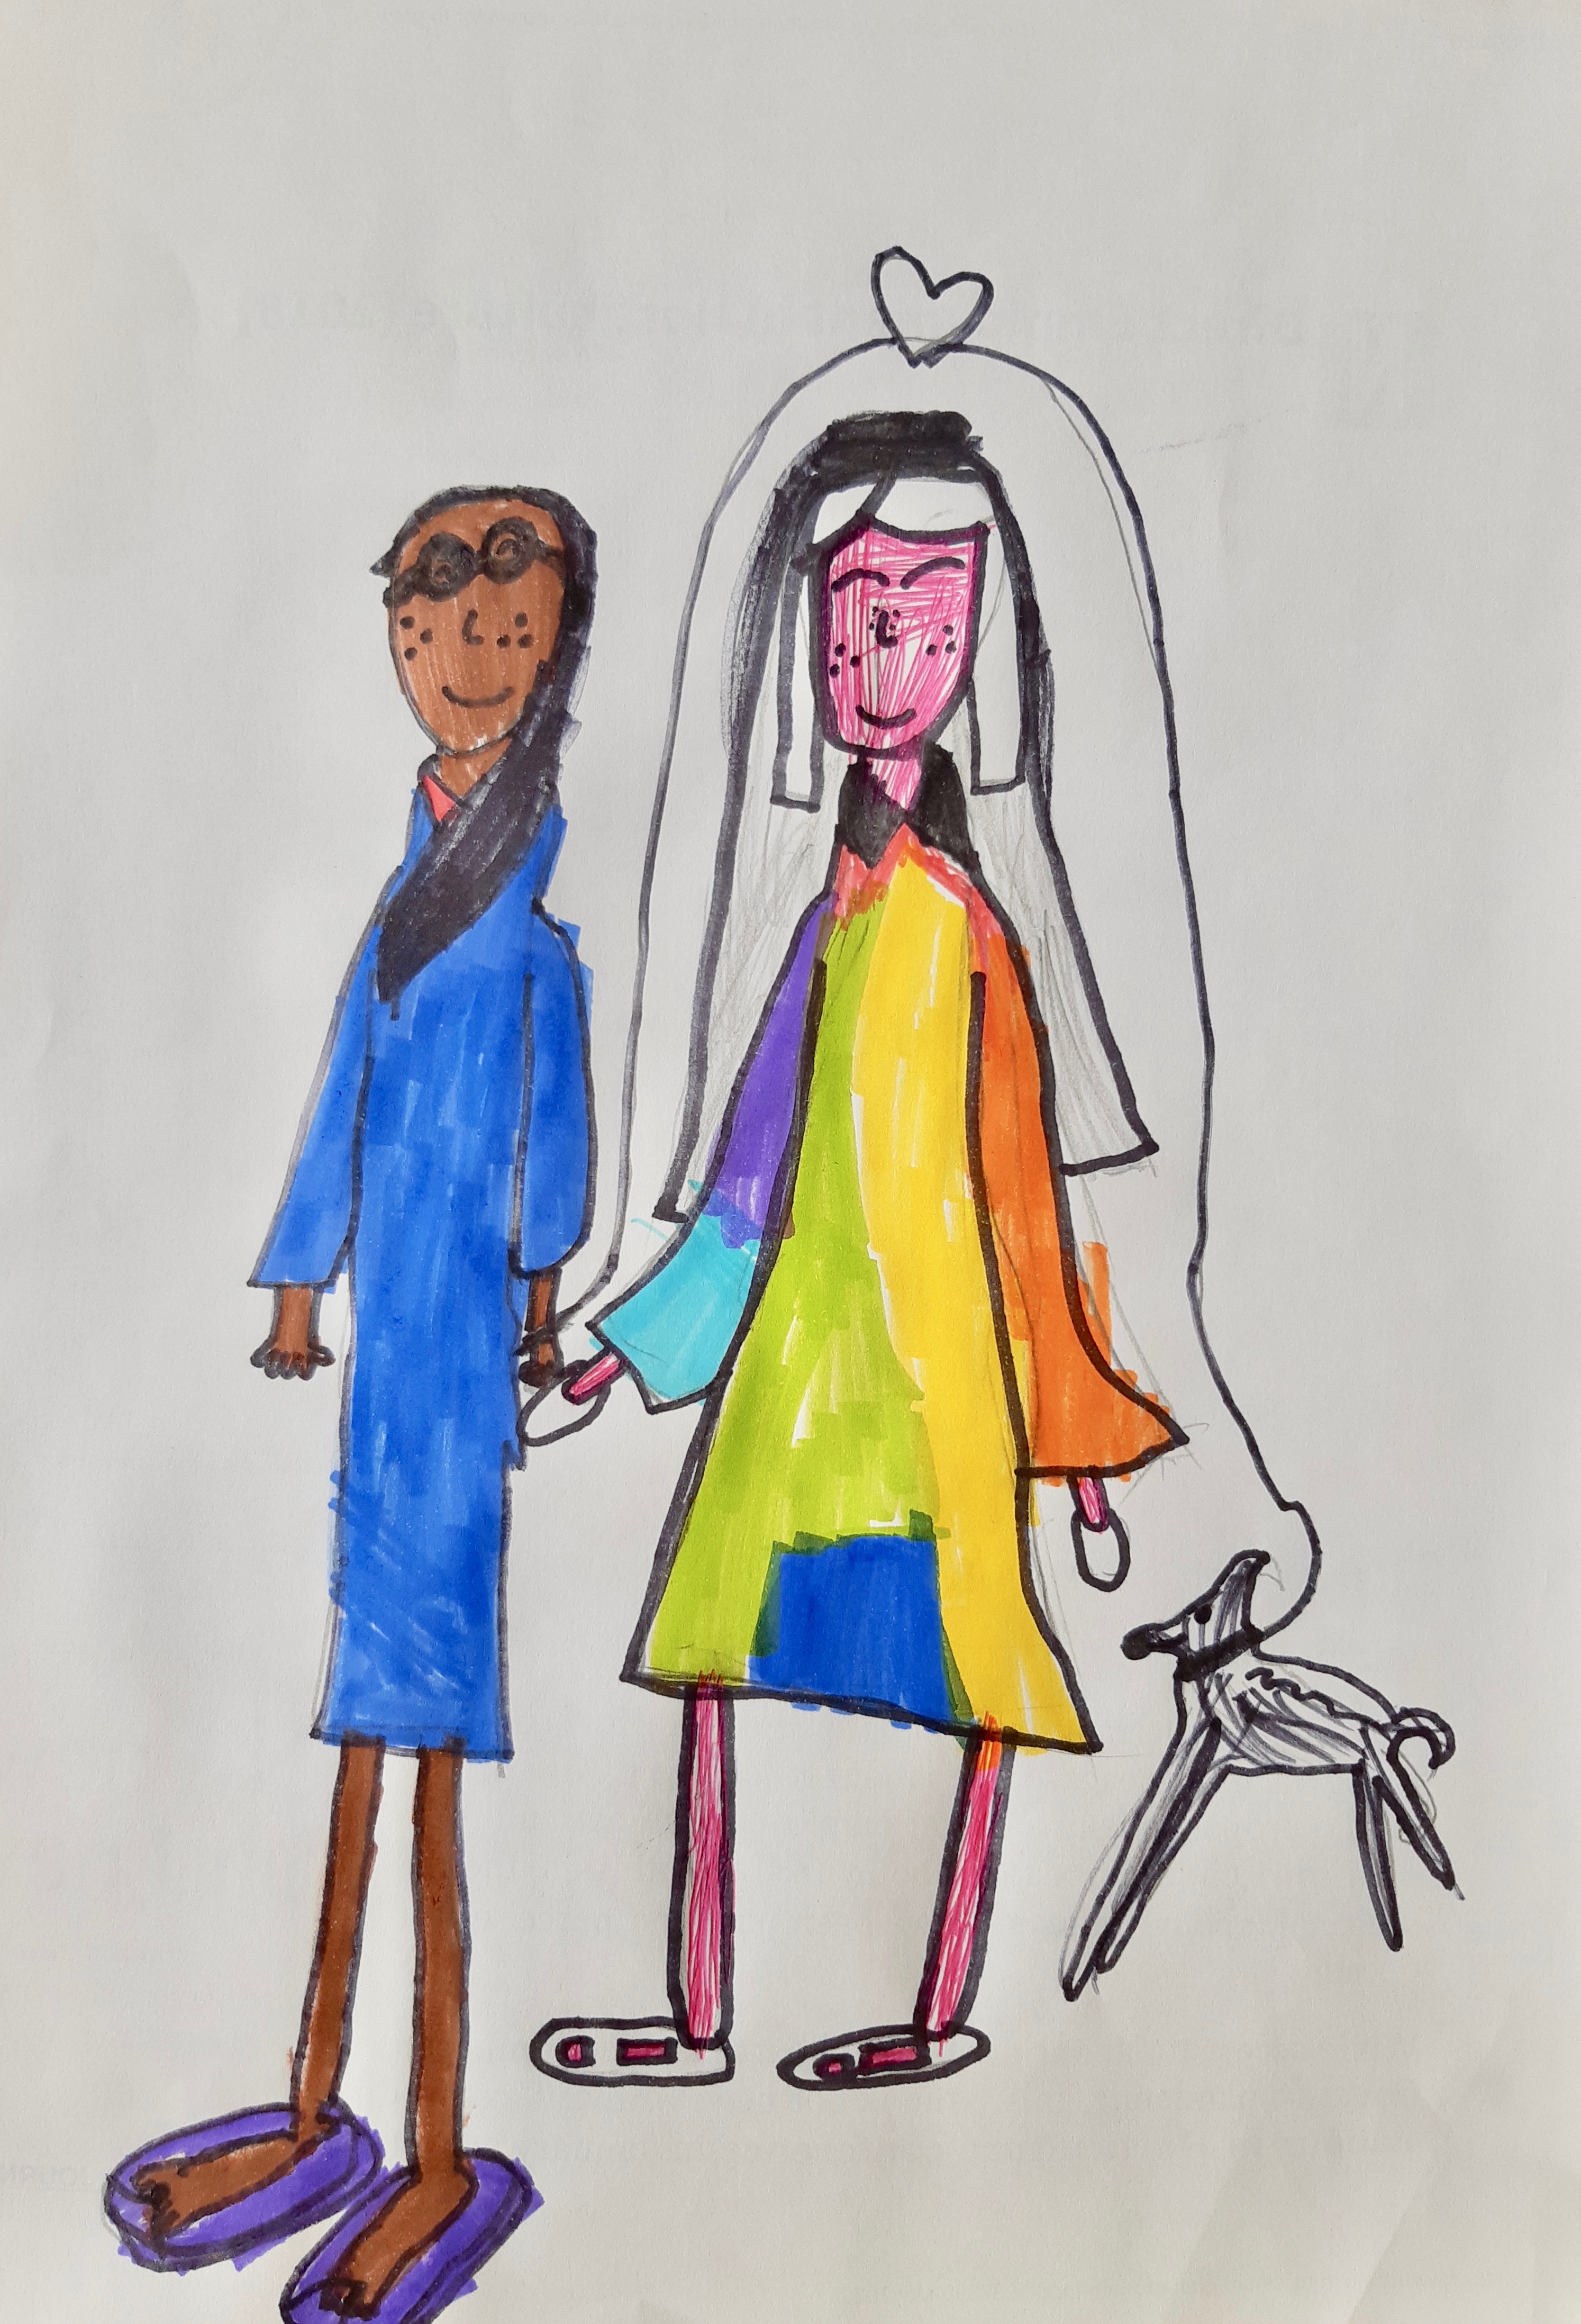 'Brides' by Avery (7) from Dublin